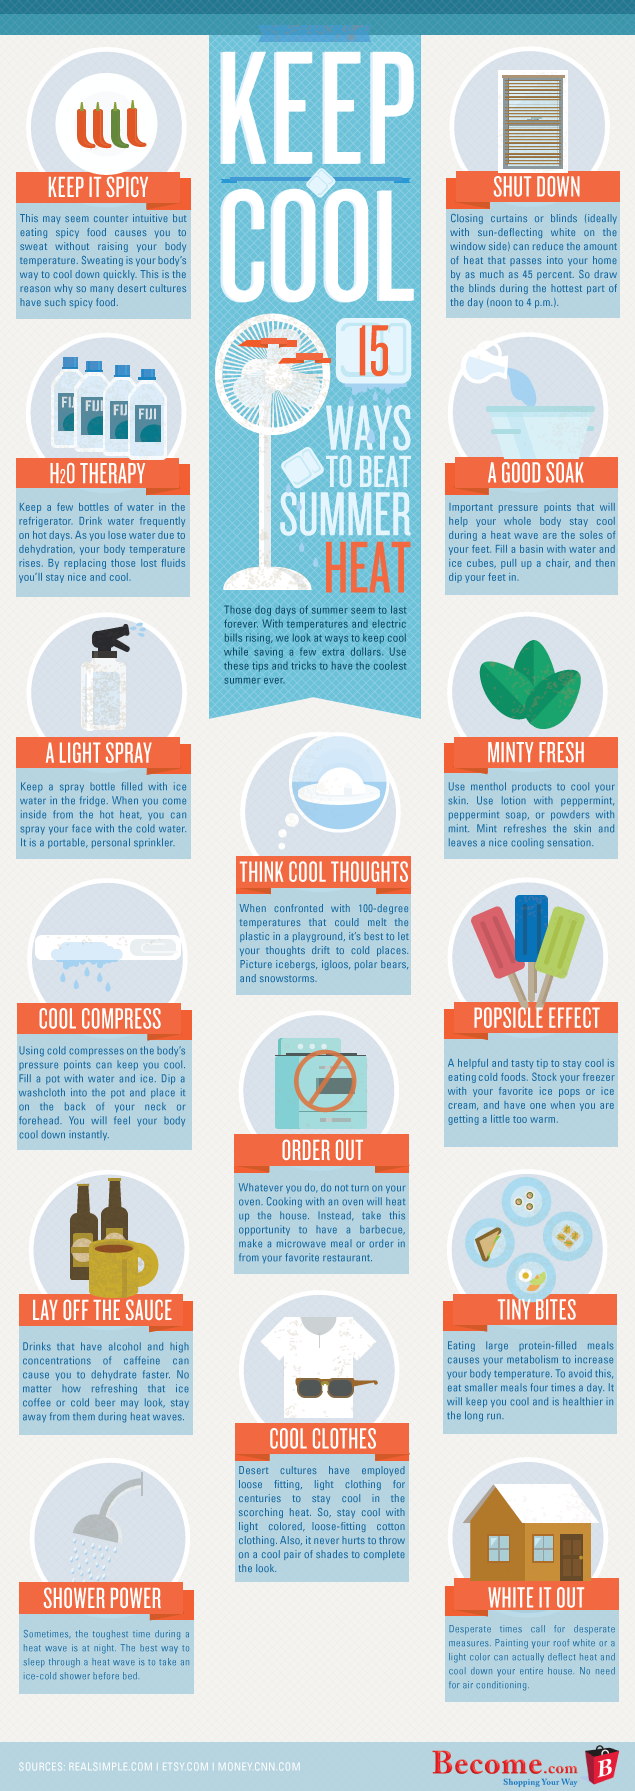 Beat Summer Heat With These 15 Life-Saving Hacks Infographic